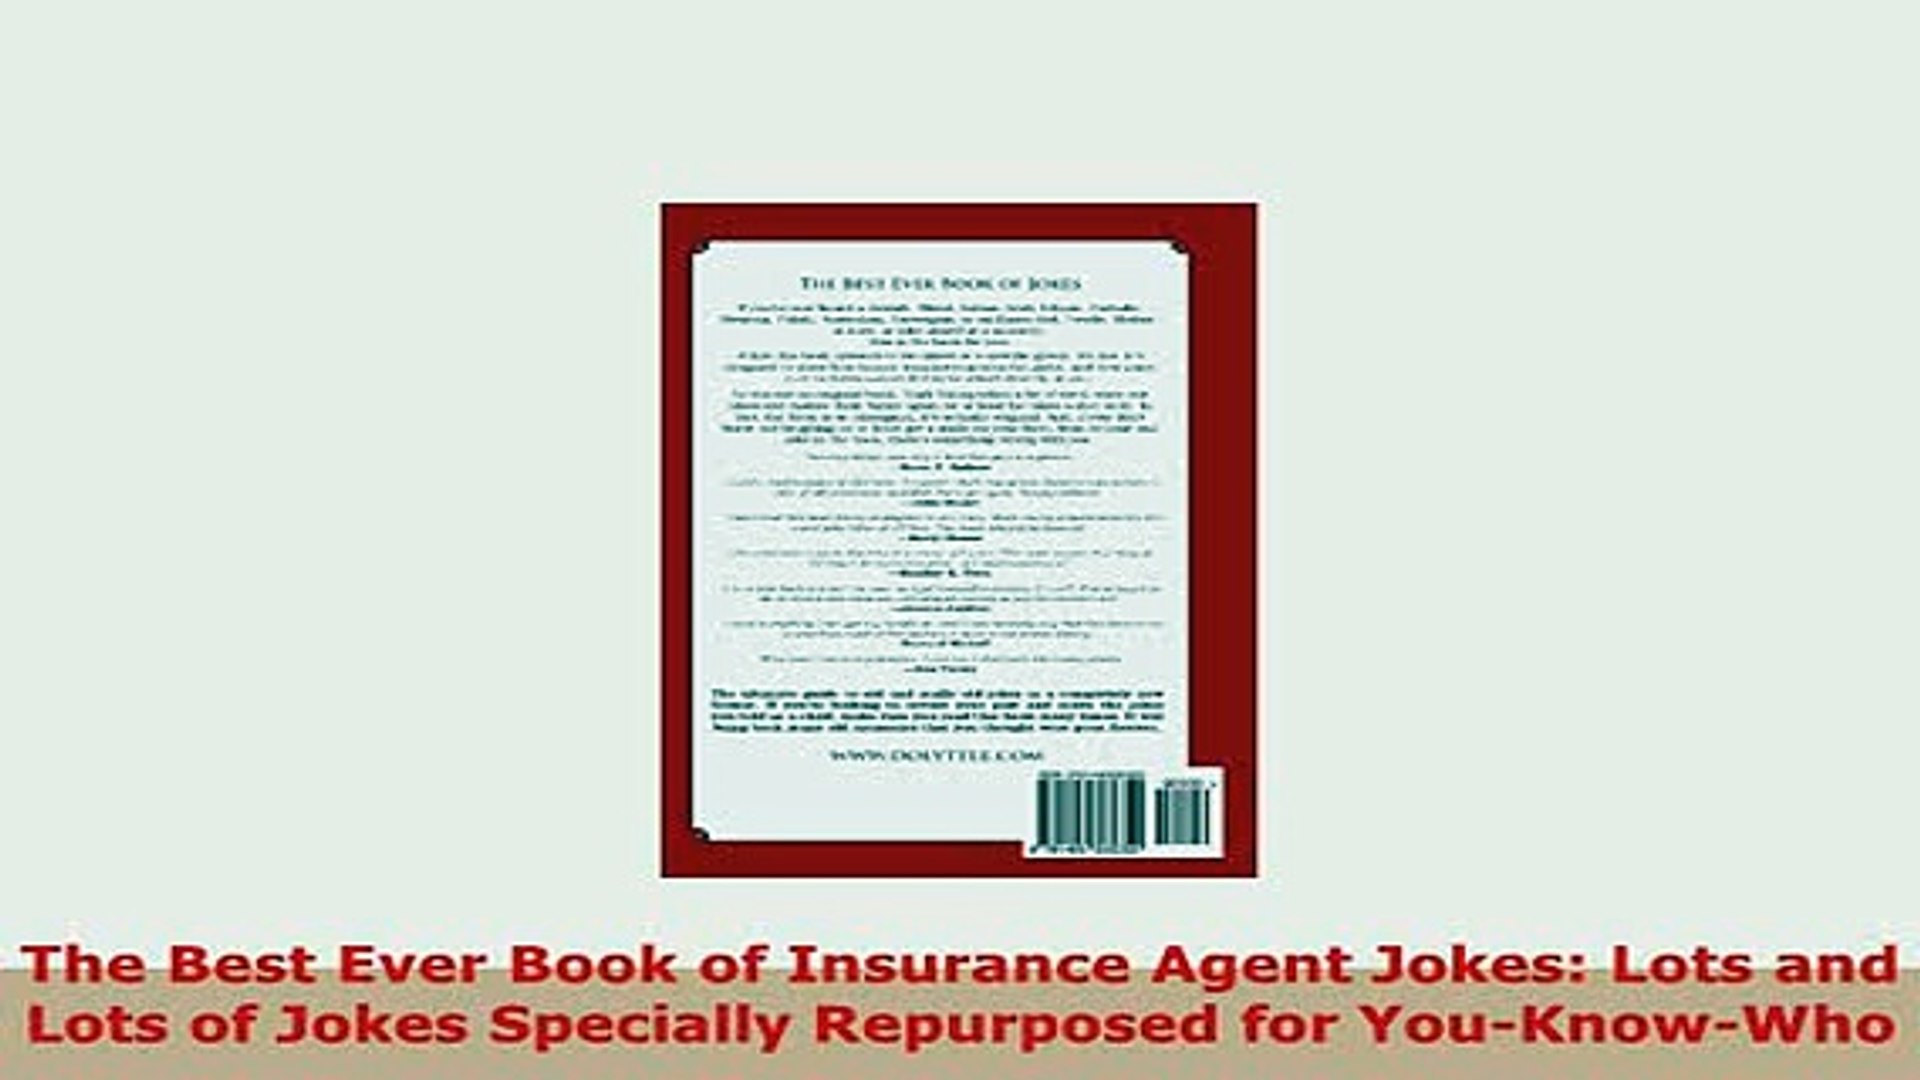 Pdf The Best Ever Book Of Insurance Agent Jokes Lots And Lots Of